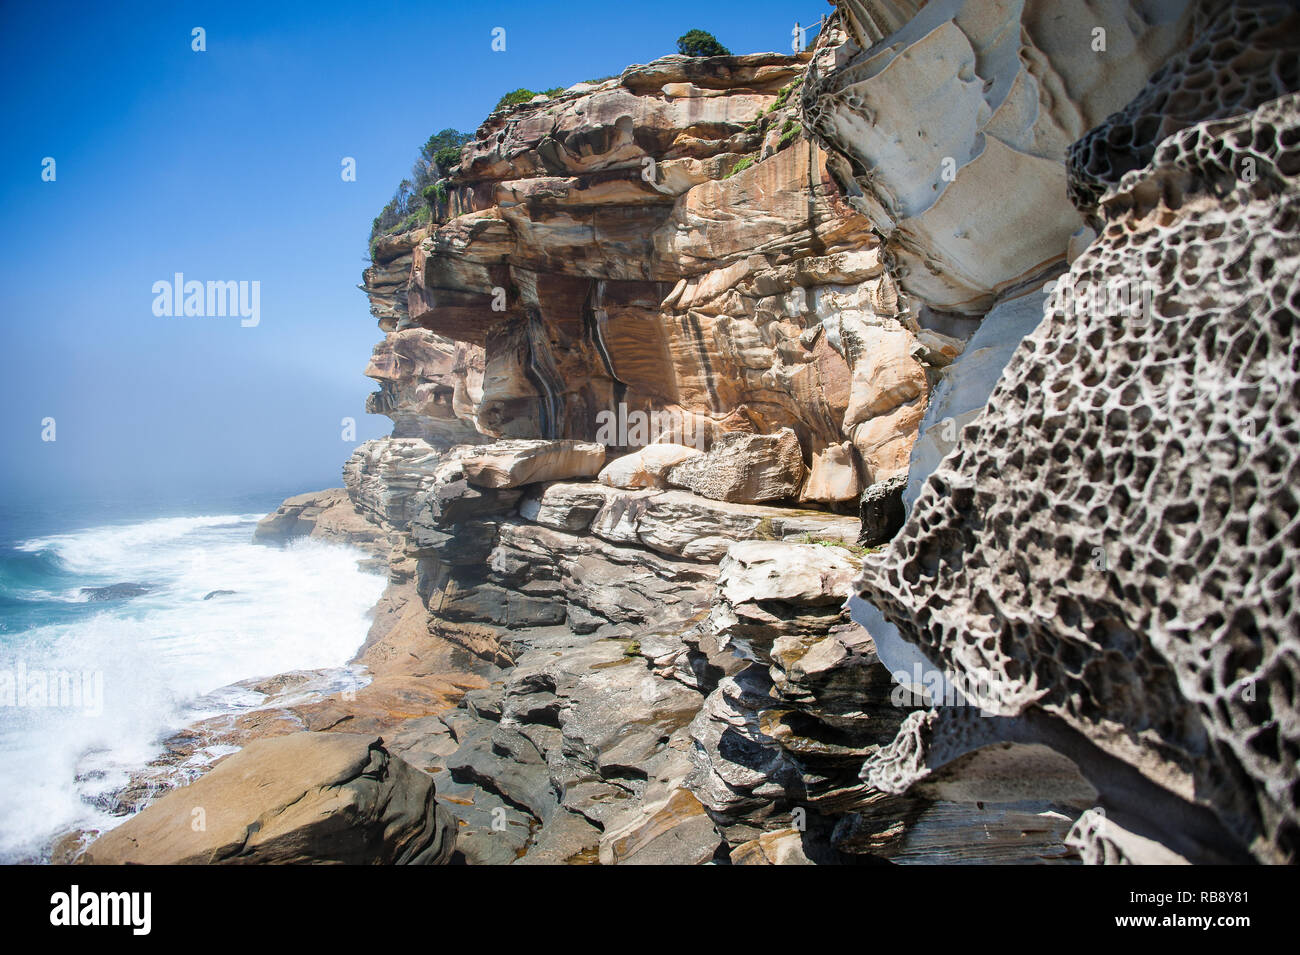 Dramatic rock formations eroded by wind and water near Bondi, Sydney, Australia. Colourful sandstone cliffs against blue sea/sky background Stock Photo